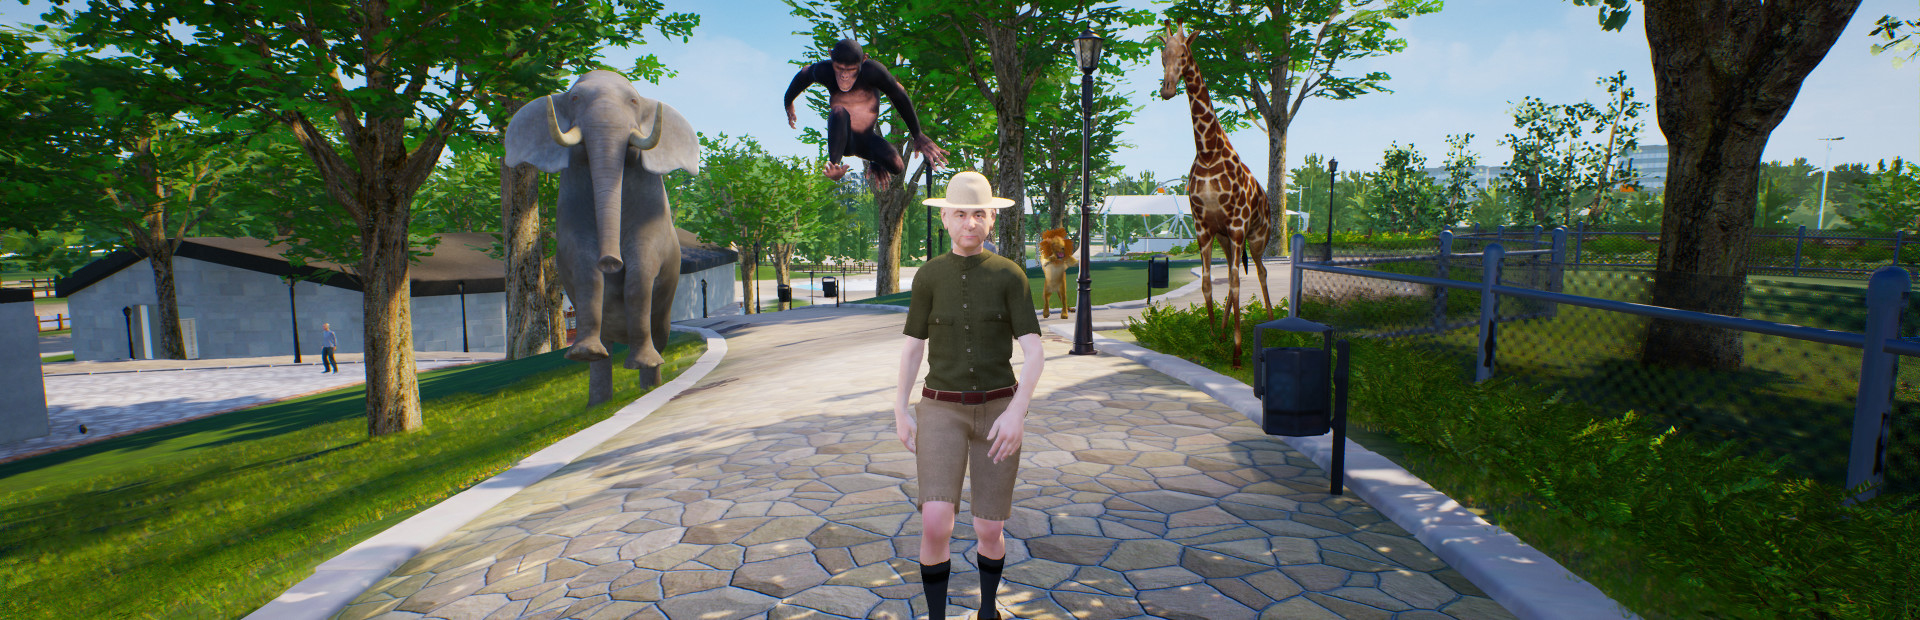 ZooKeeper Simulator cover image